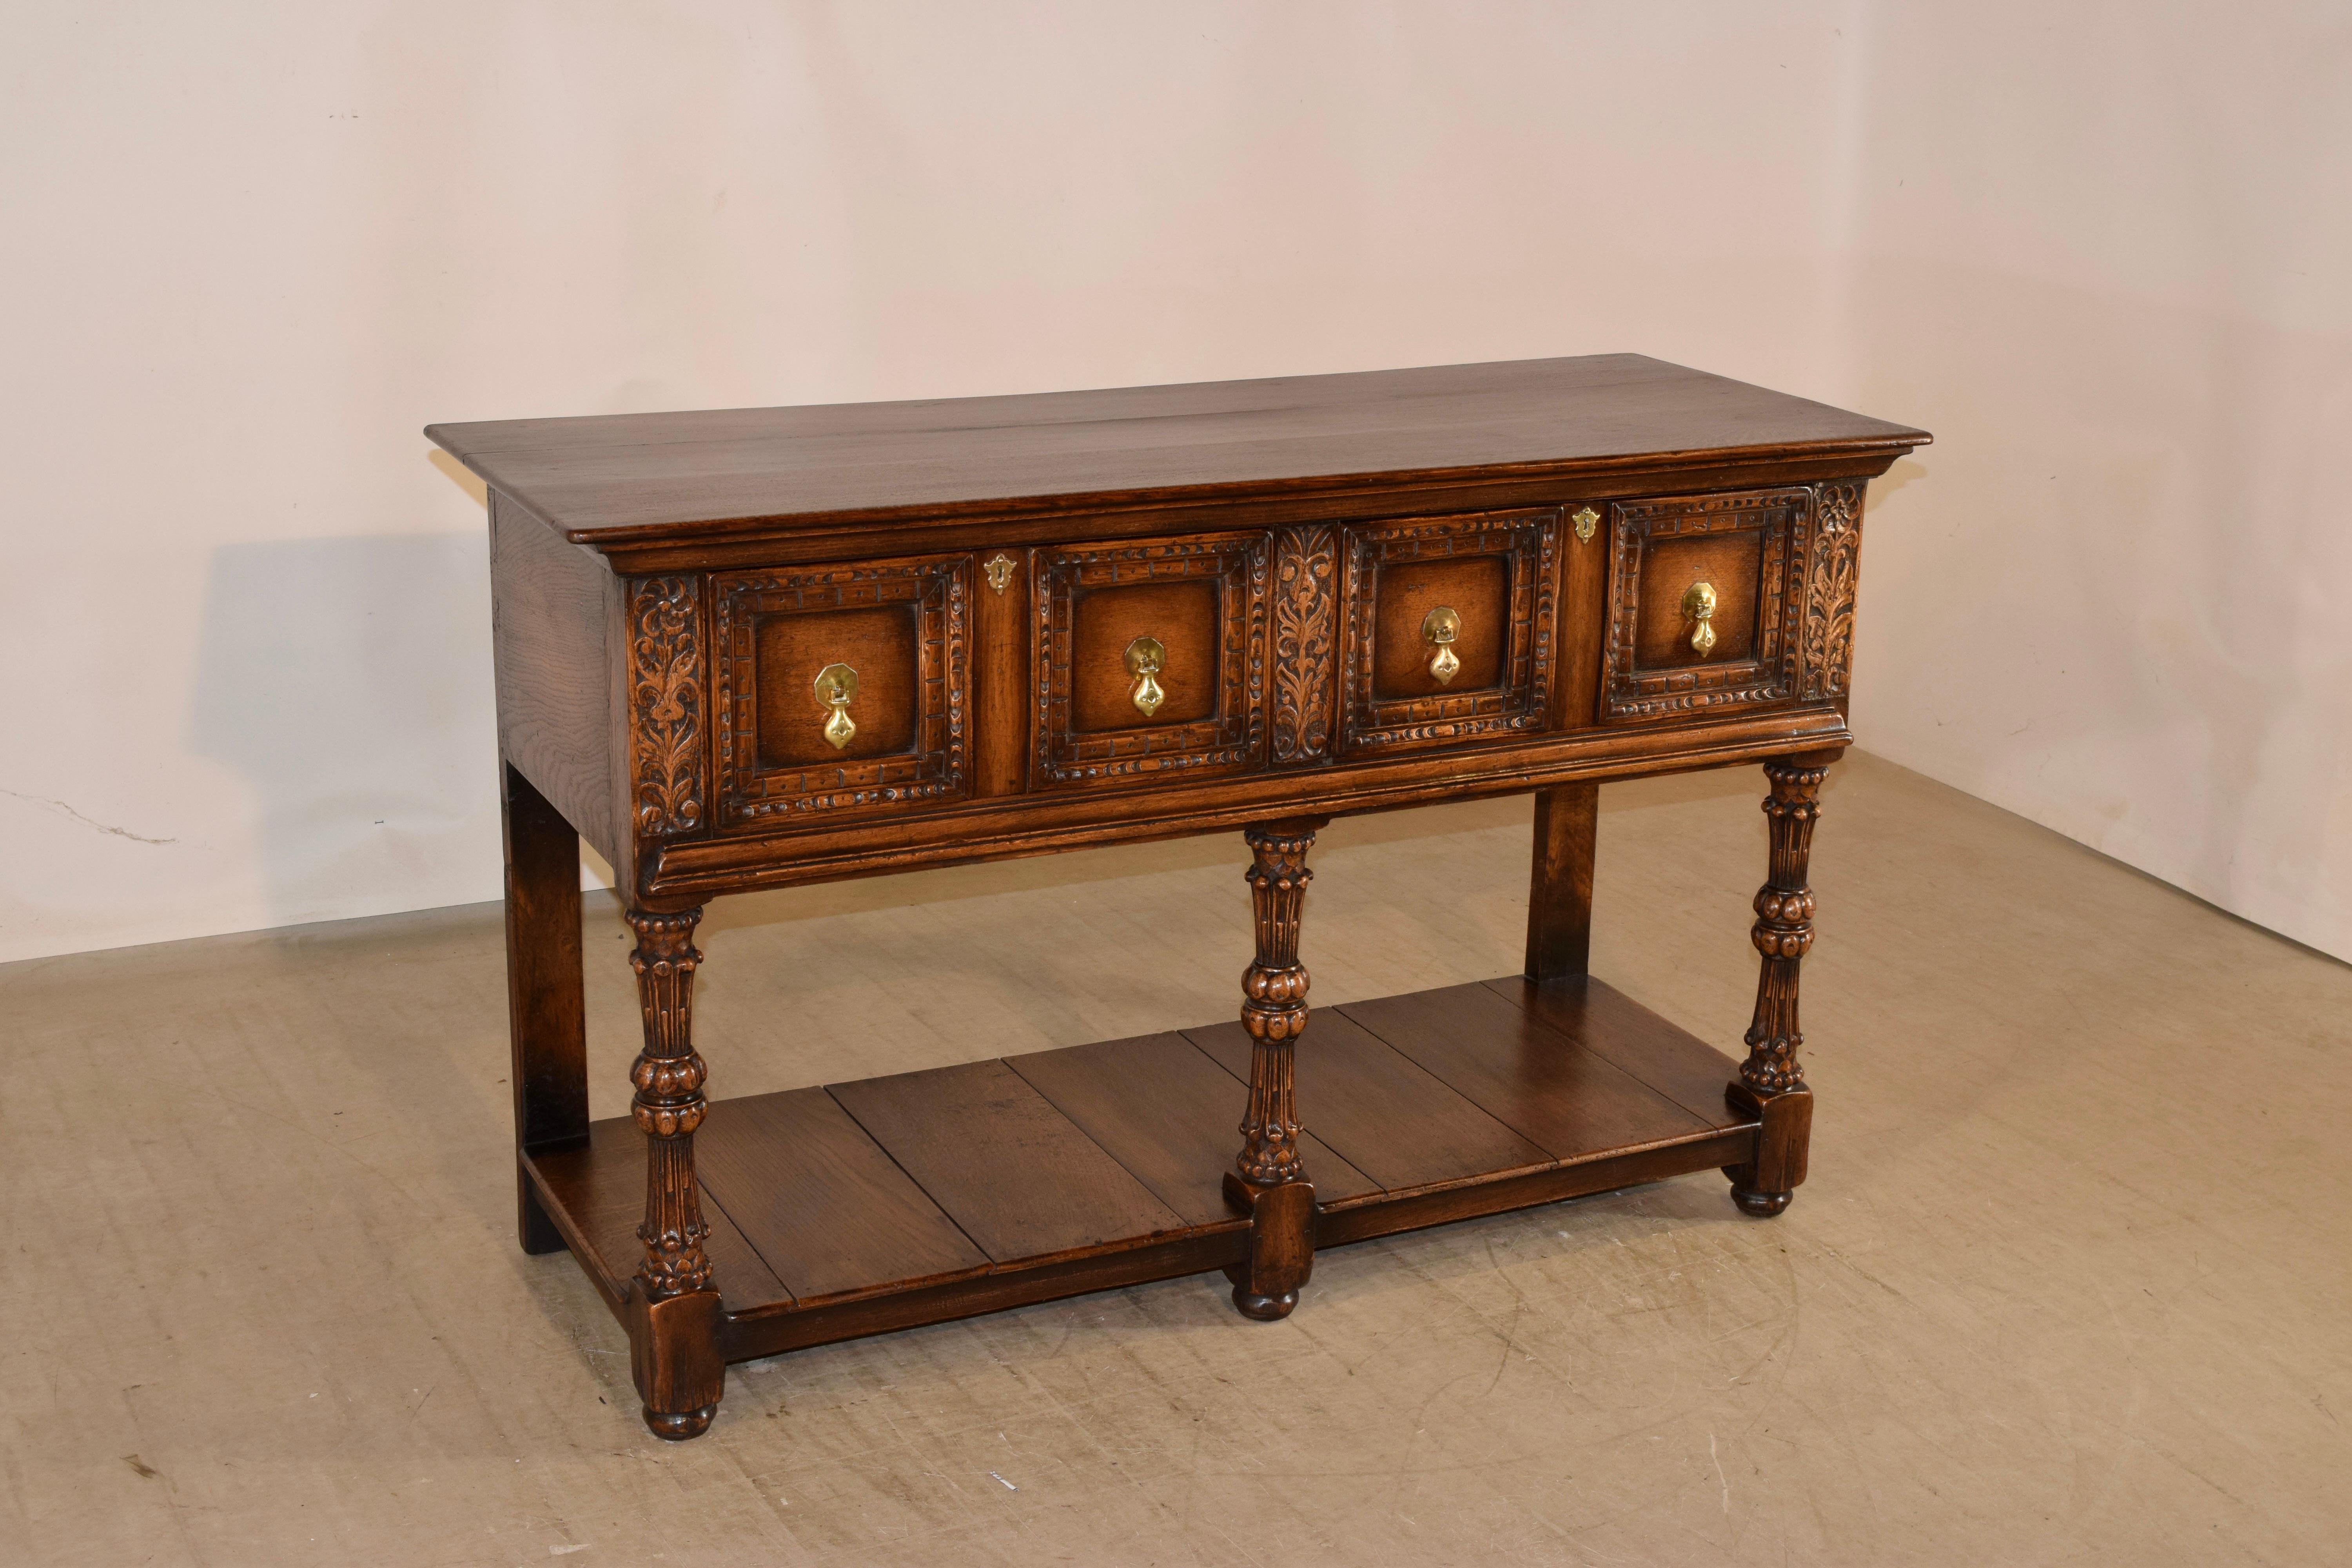 19th Century English oak sideboard with a plank top following down to simple sides and two paneled and carved drawers in the front, flanked by floral carved panels over a molded edge. The piece is supported on three wonderfully carved and